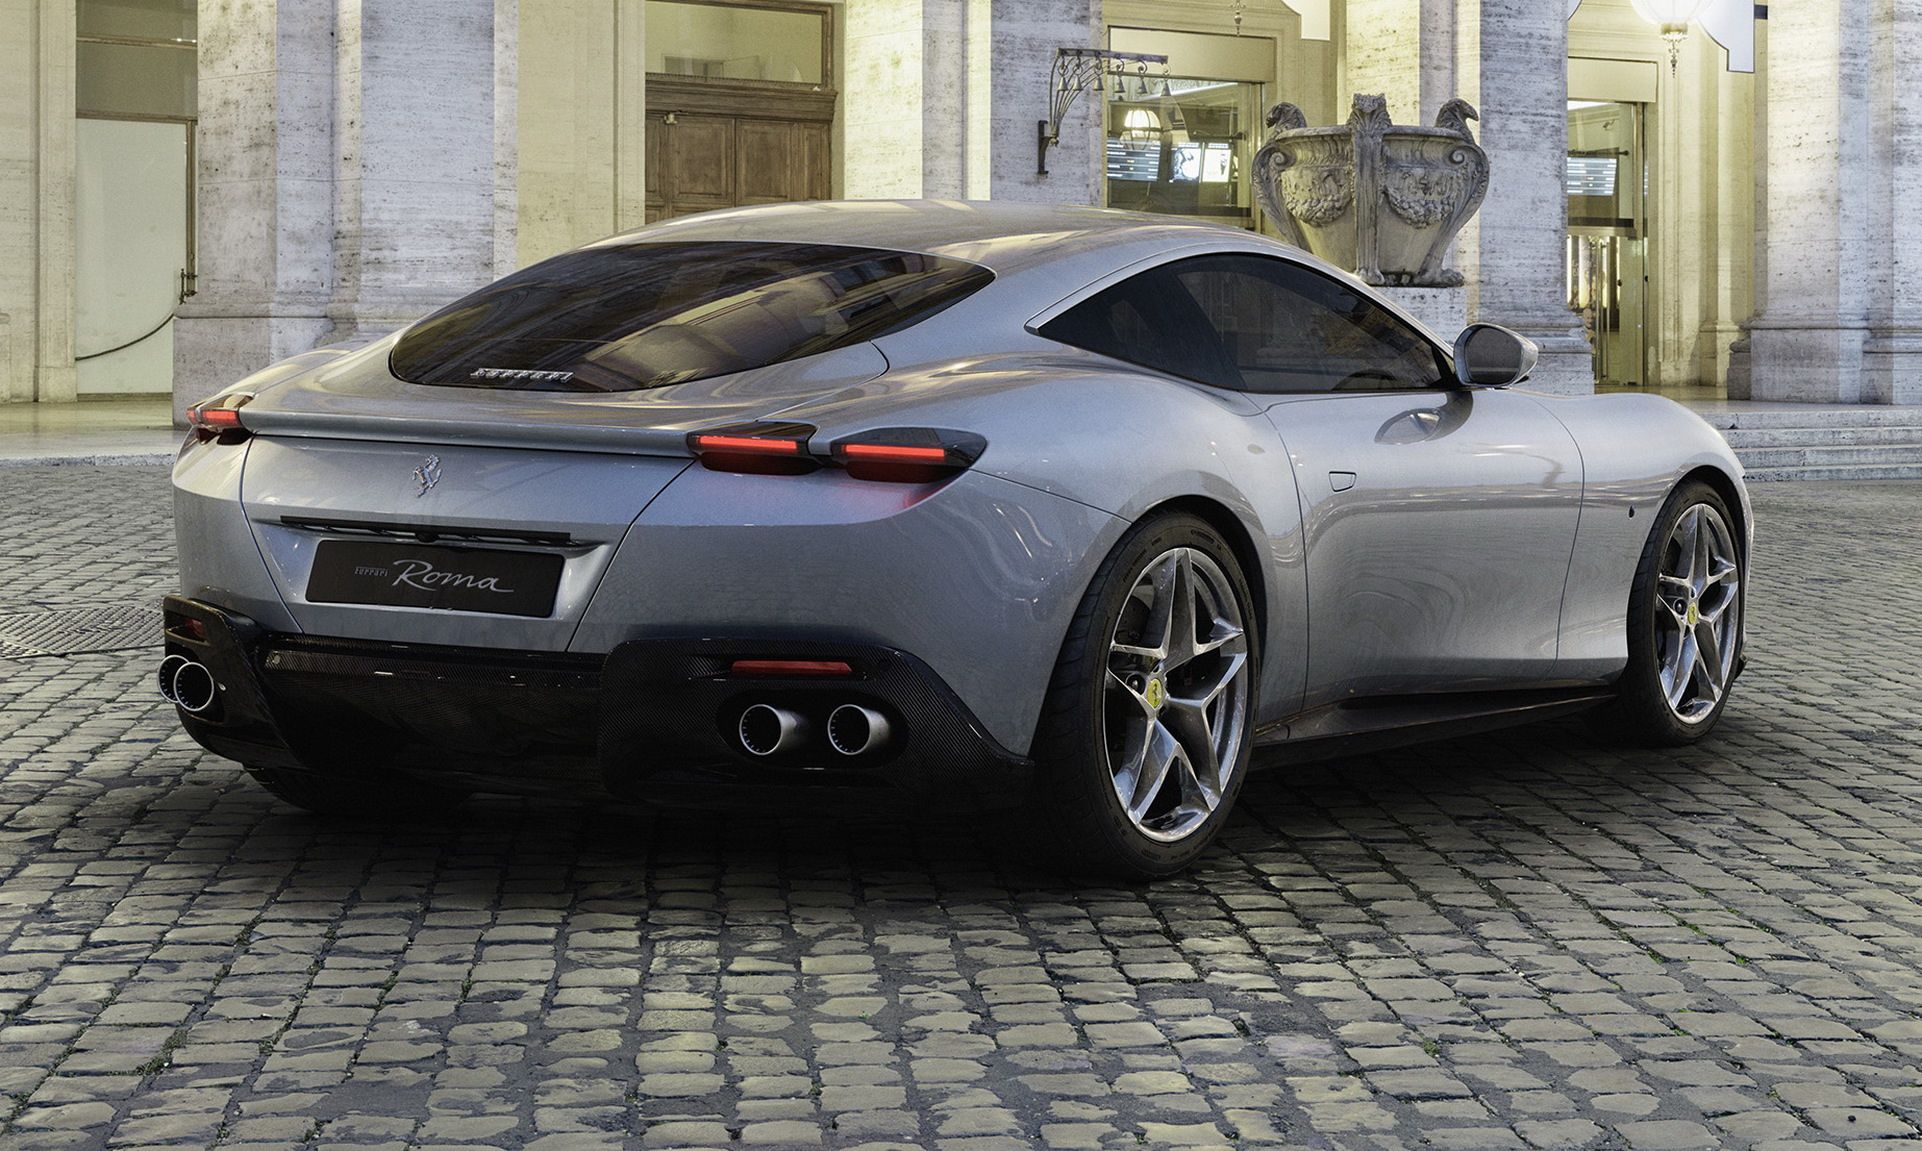 Ferrari Roma Is A Coupe With Understated Styling And A 612 HP